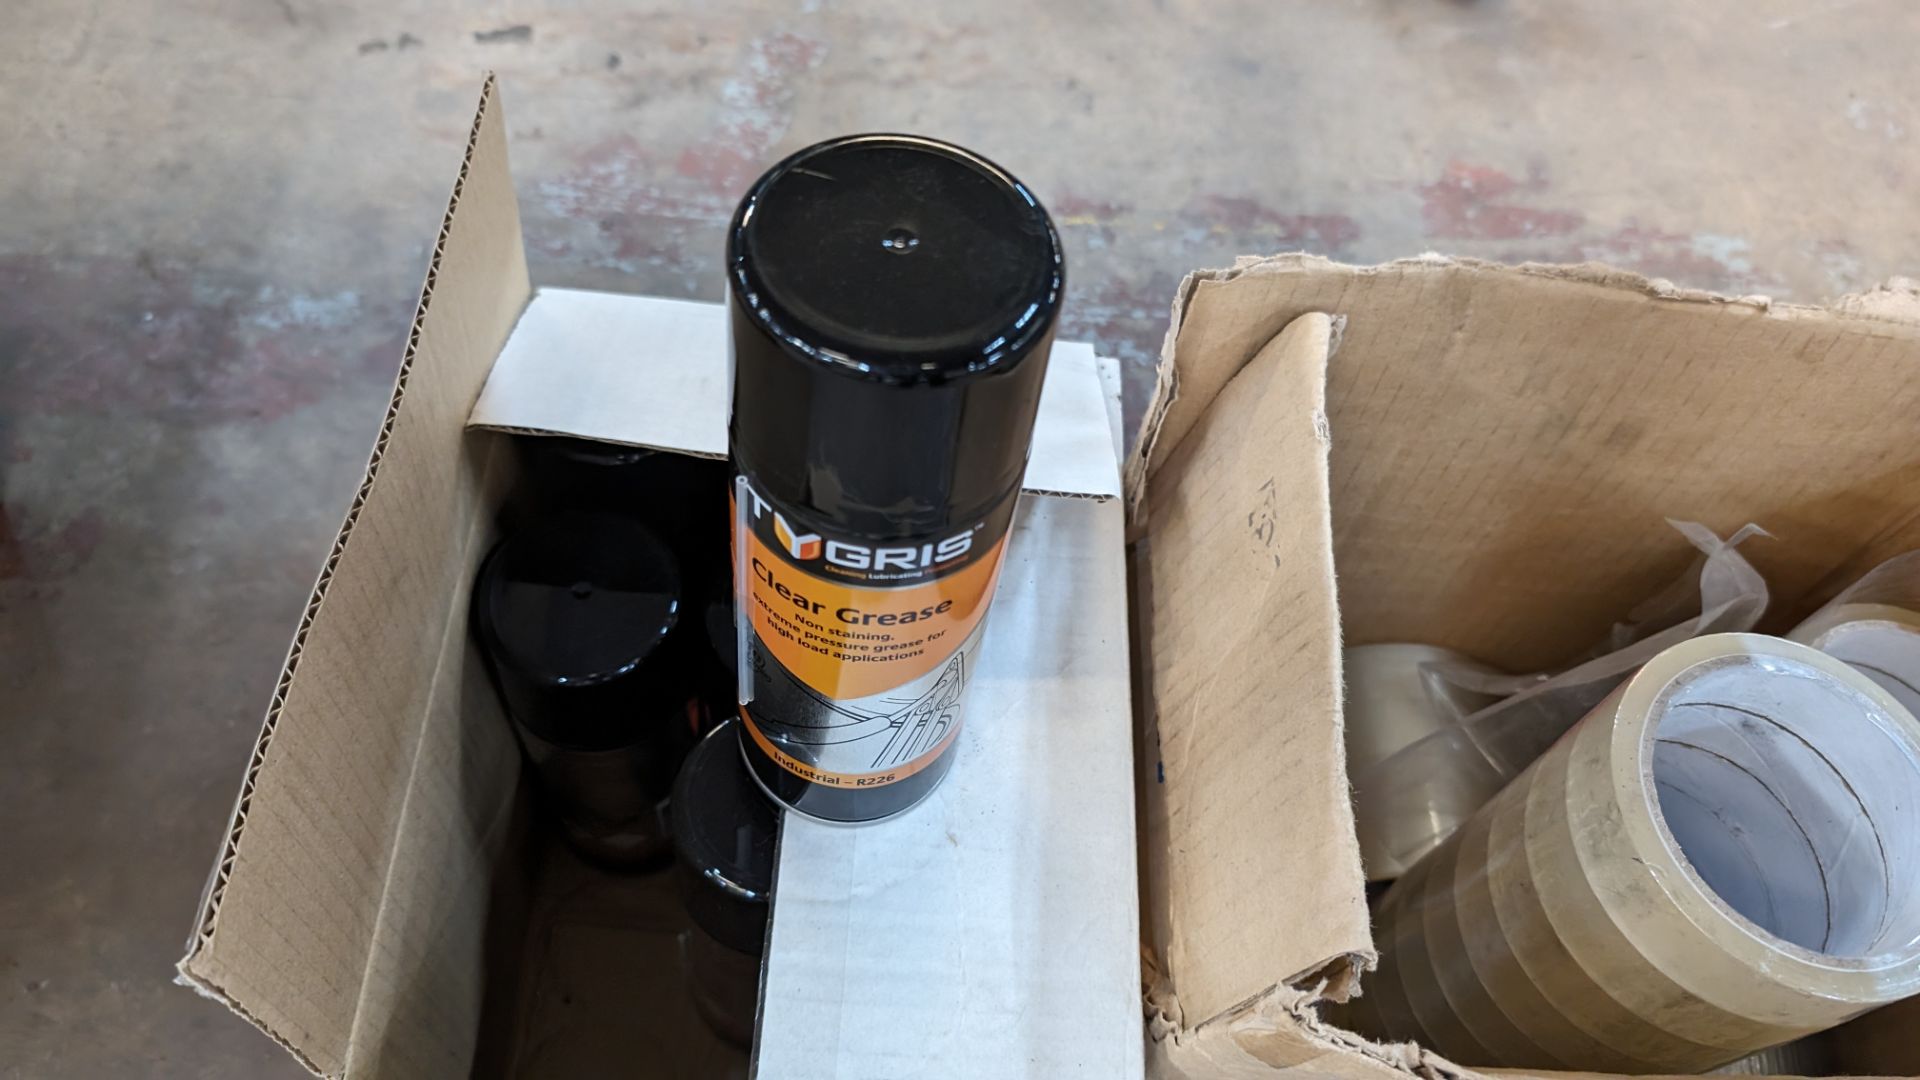 Box of tape plus box of grease spray - Image 4 of 6